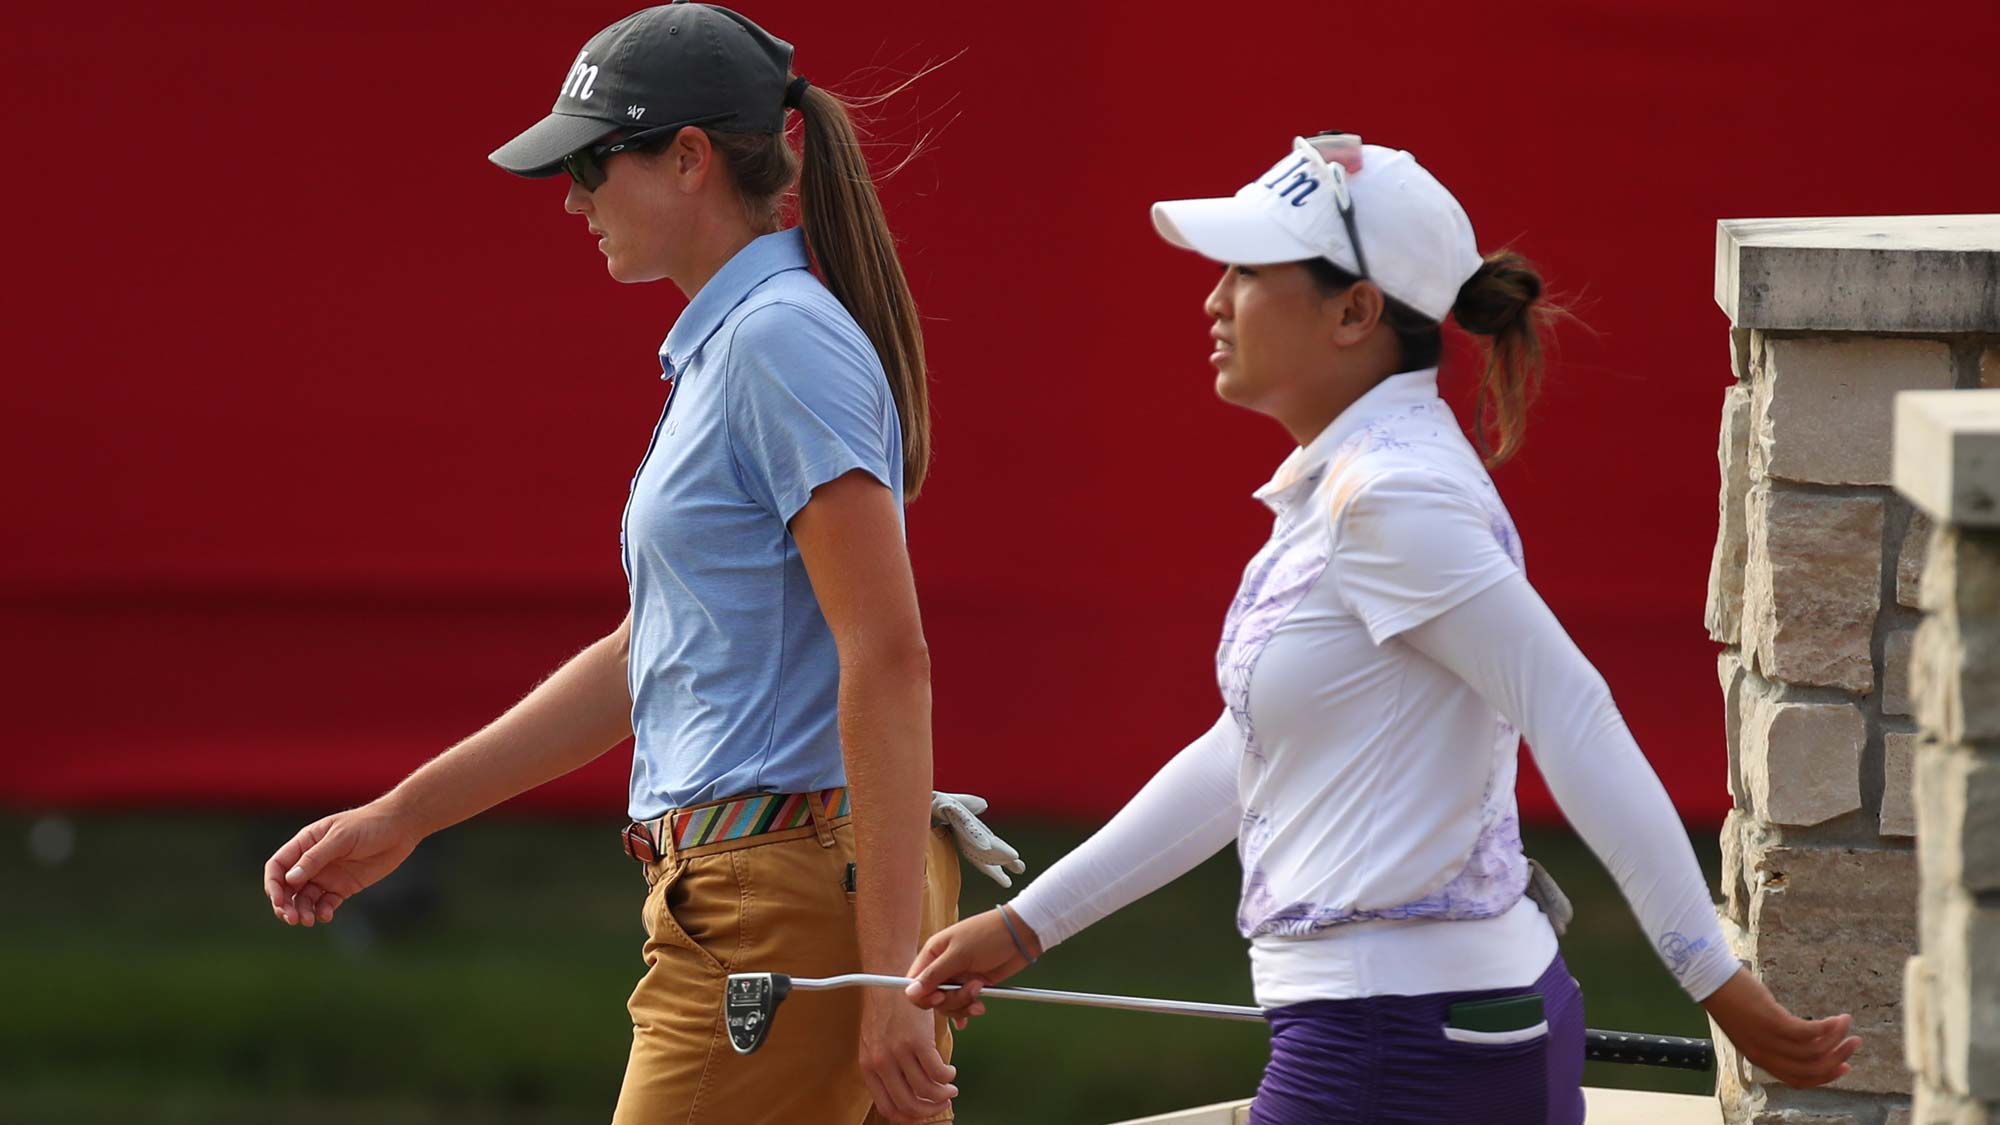 Teammates Jasmine Suwannapura of Thailand (R) and Cydney Clanton of the United States walk to the 18th green during round three of the Dow Great Lakes Bay Invitational